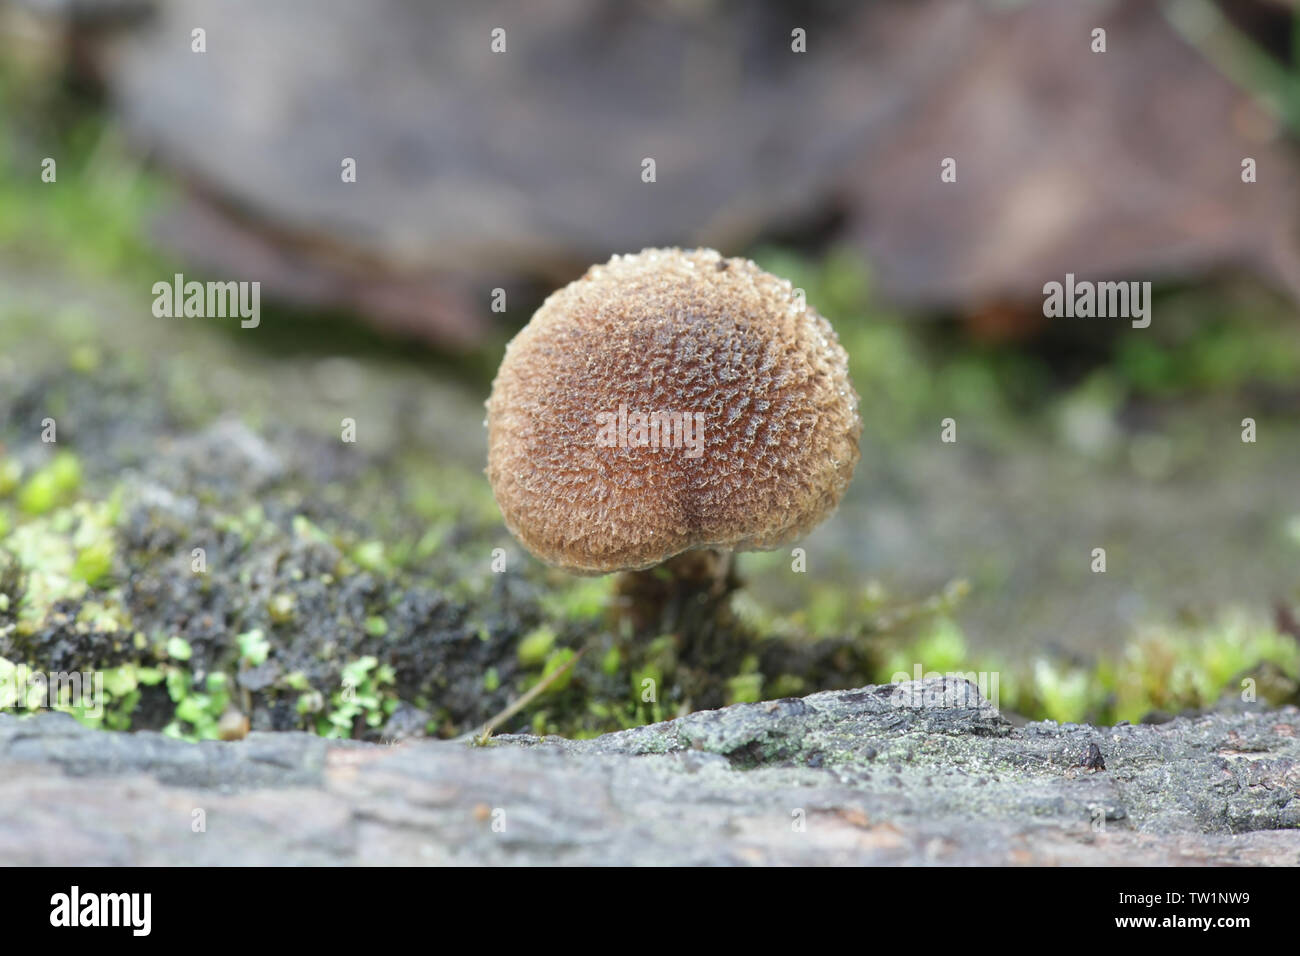 Inocybe lacera, commonly known as the torn fibrecap, a poisonous mushroom from Finland Stock Photo